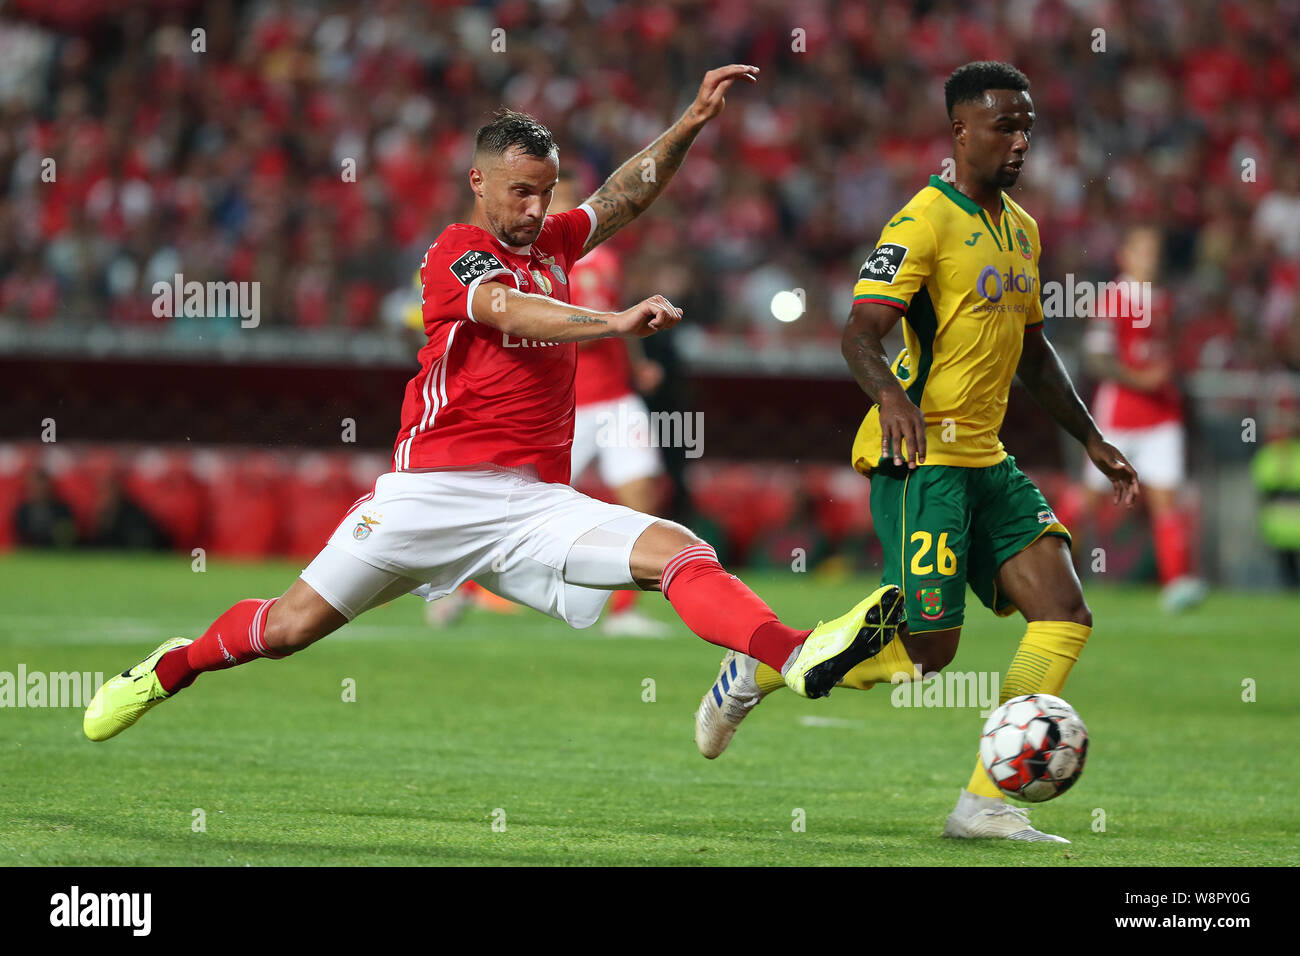 Lisbon, Portugal. 10th Aug, 2019. Benfica's Haris Seferovic (L) vies with Pacos de Ferreira's Maracas during the Portuguese league football match between Benfica and Pacos de Ferreira in Lisbon, Portugal, on Aug. 10, 2019. Credit: Petro Fiuza/Xinhua/Alamy Live News Stock Photo